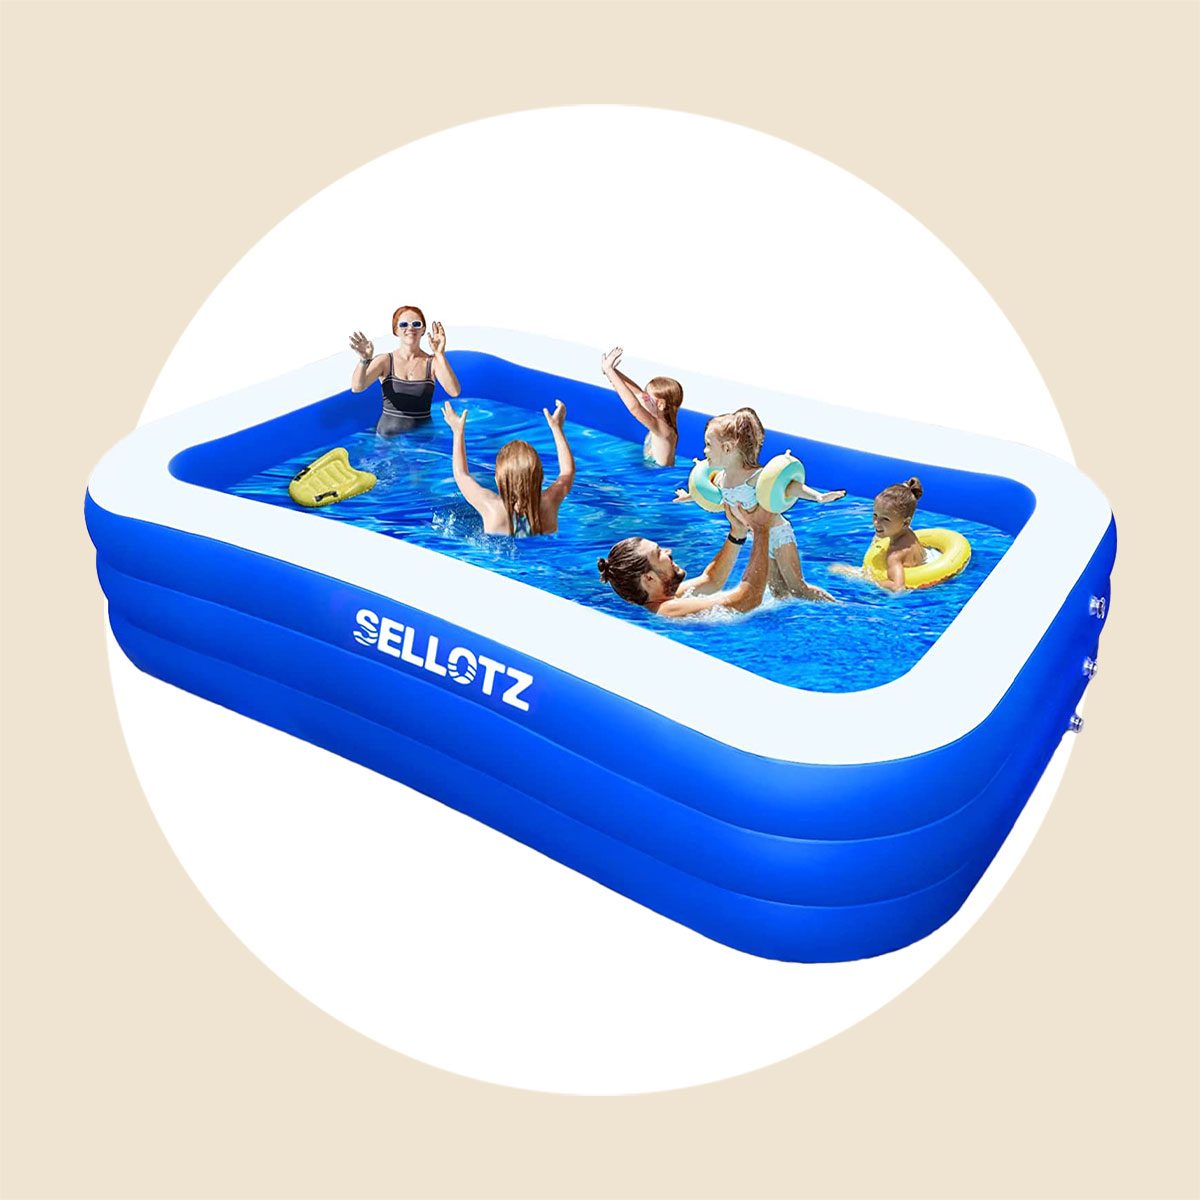 TOH Ecomm SELLOTZ Inflatable Pool For Kids And Adults Via Amazon.com  ?w=1200